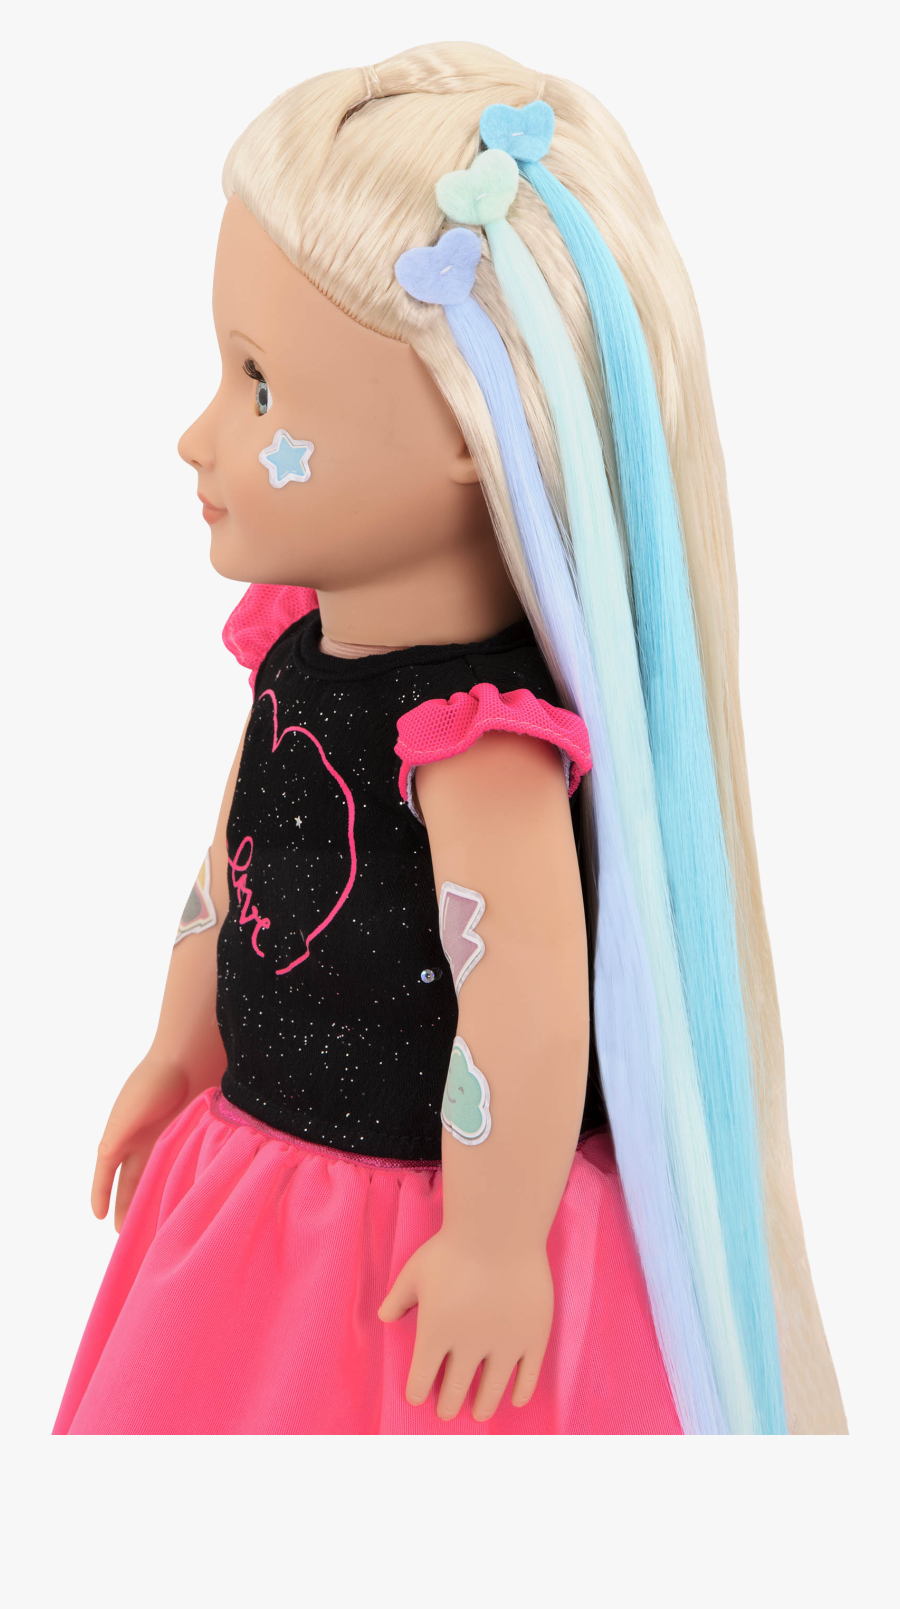 Side Profile Of Luana With Hair Extensions - Plush, Transparent Clipart